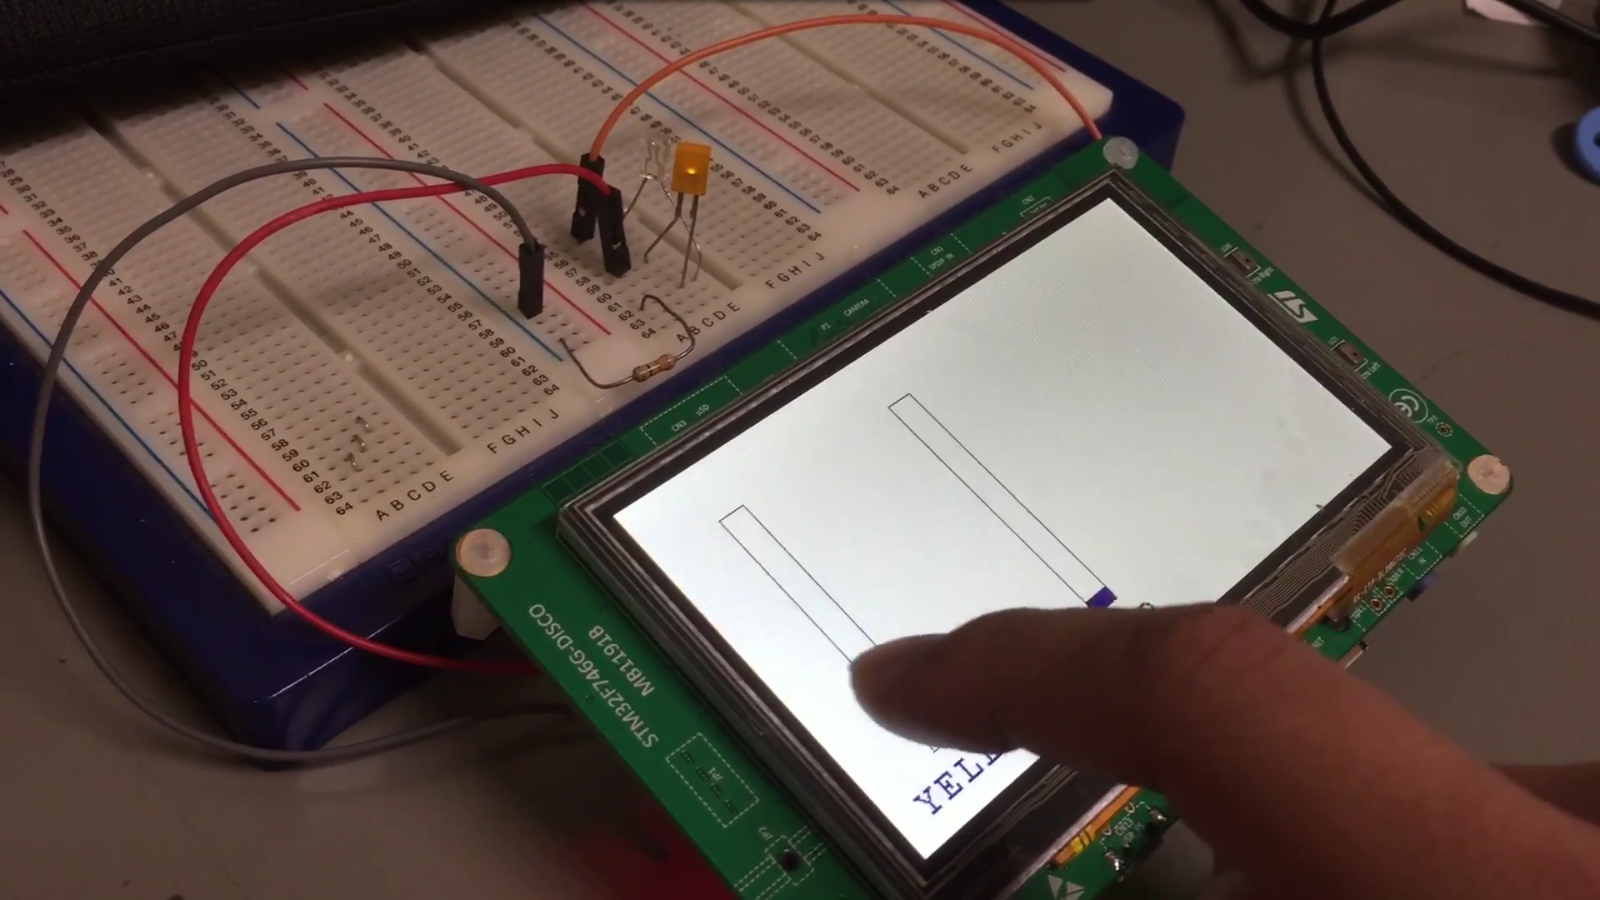 Stm32-f7-Disco touch panel application 